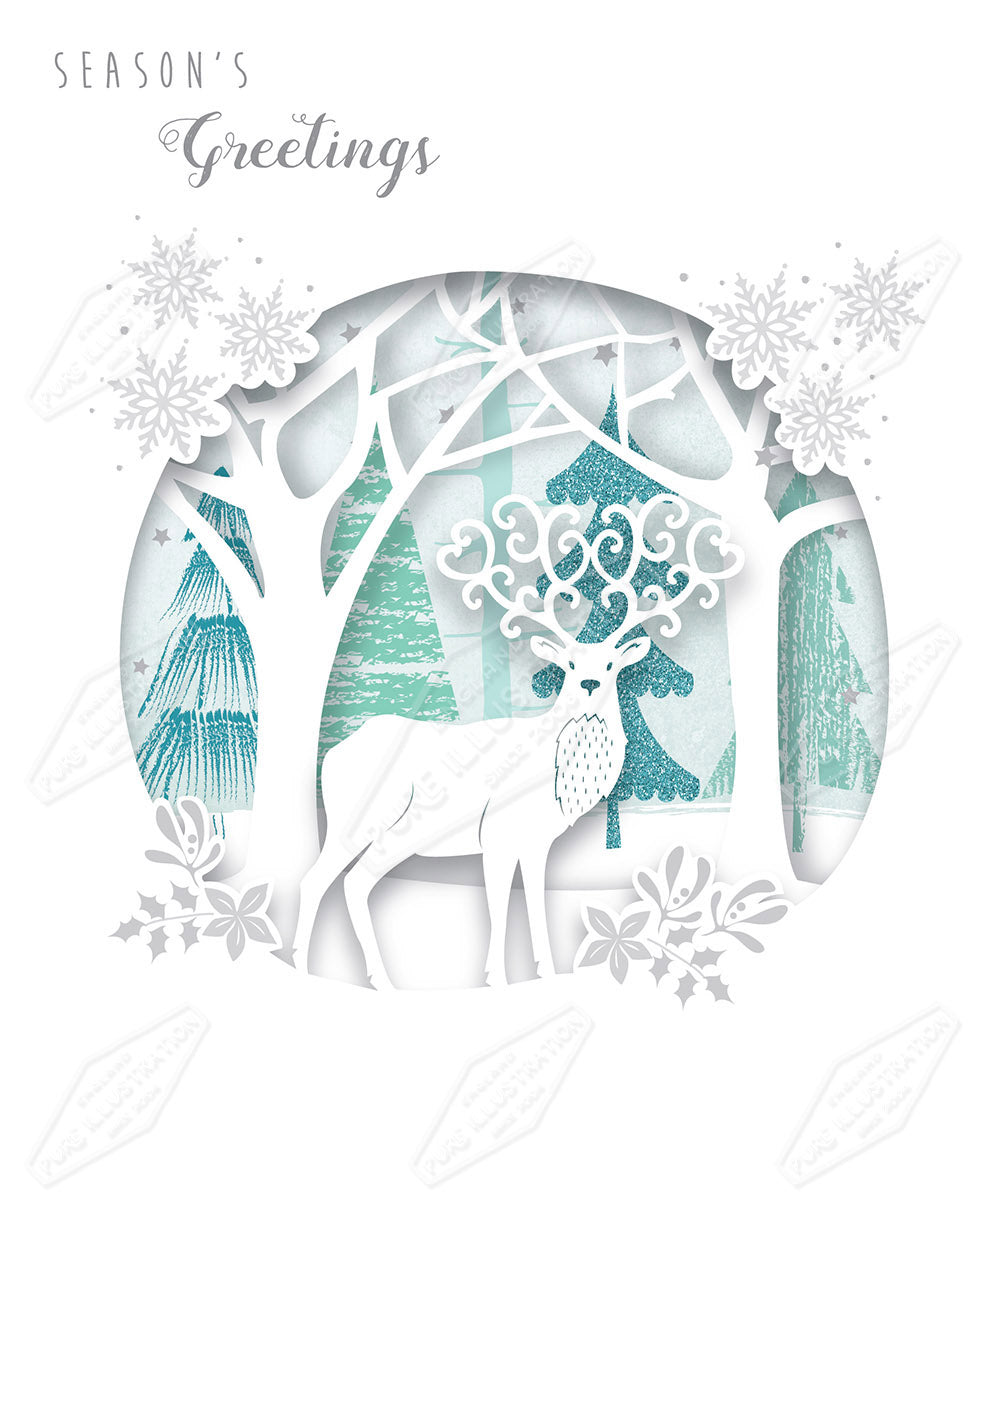 00033631AMC - Stag Christmas Laser Cut by Amanda McDonough - represented by Pure Art Licensing Agency - Christmas Greeting Card Design